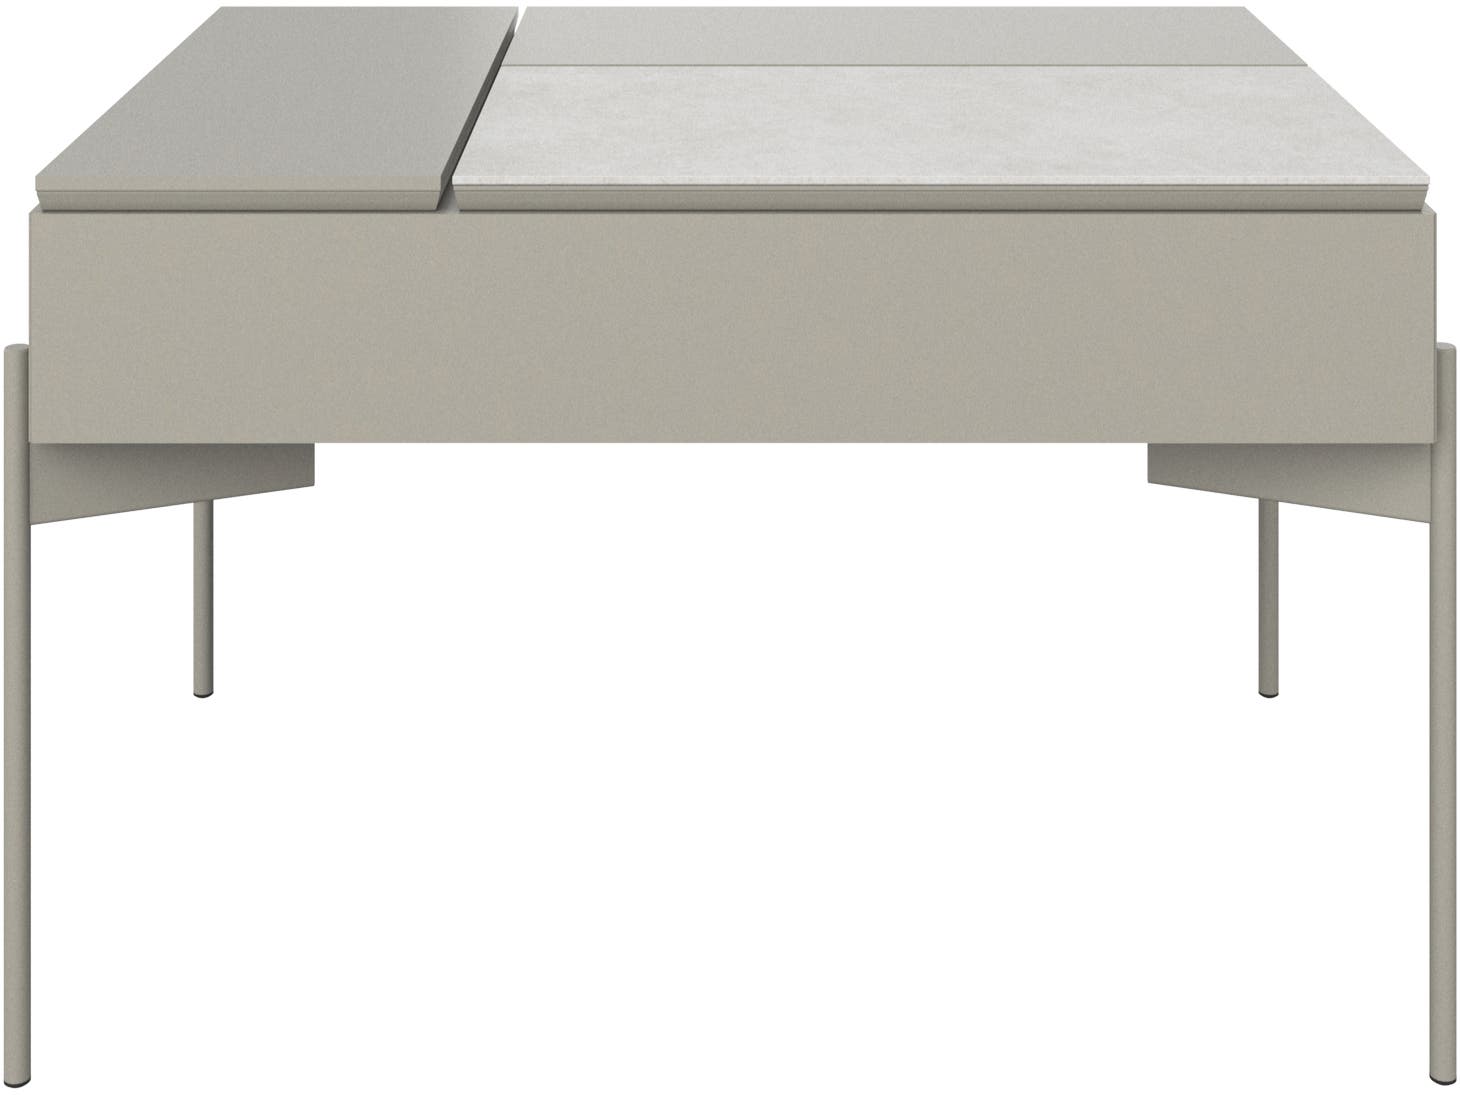 Chiva functional coffee table with storage | BoConcept